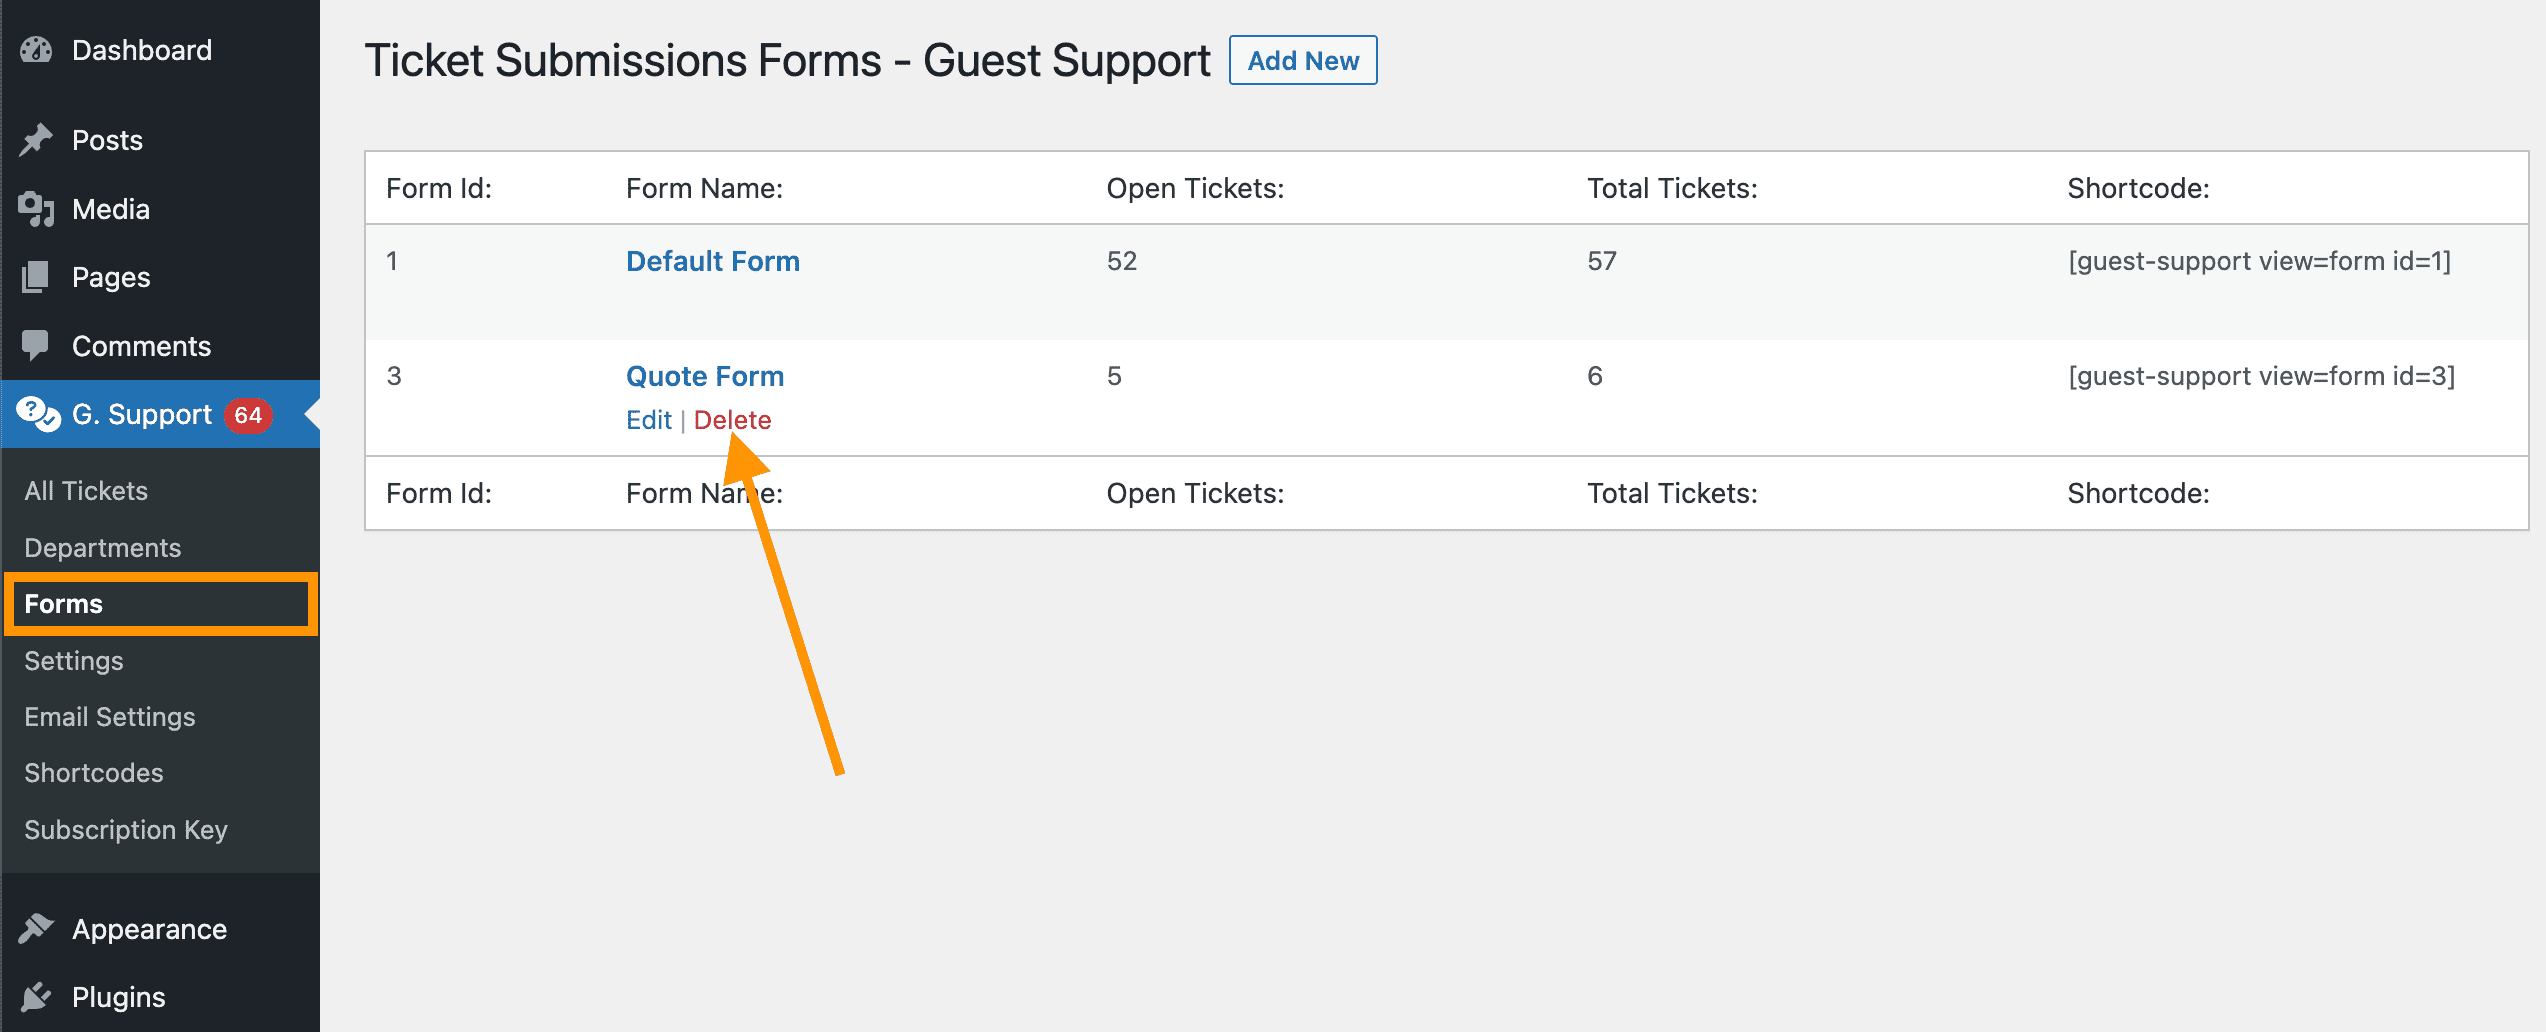 Guest support - delete forms